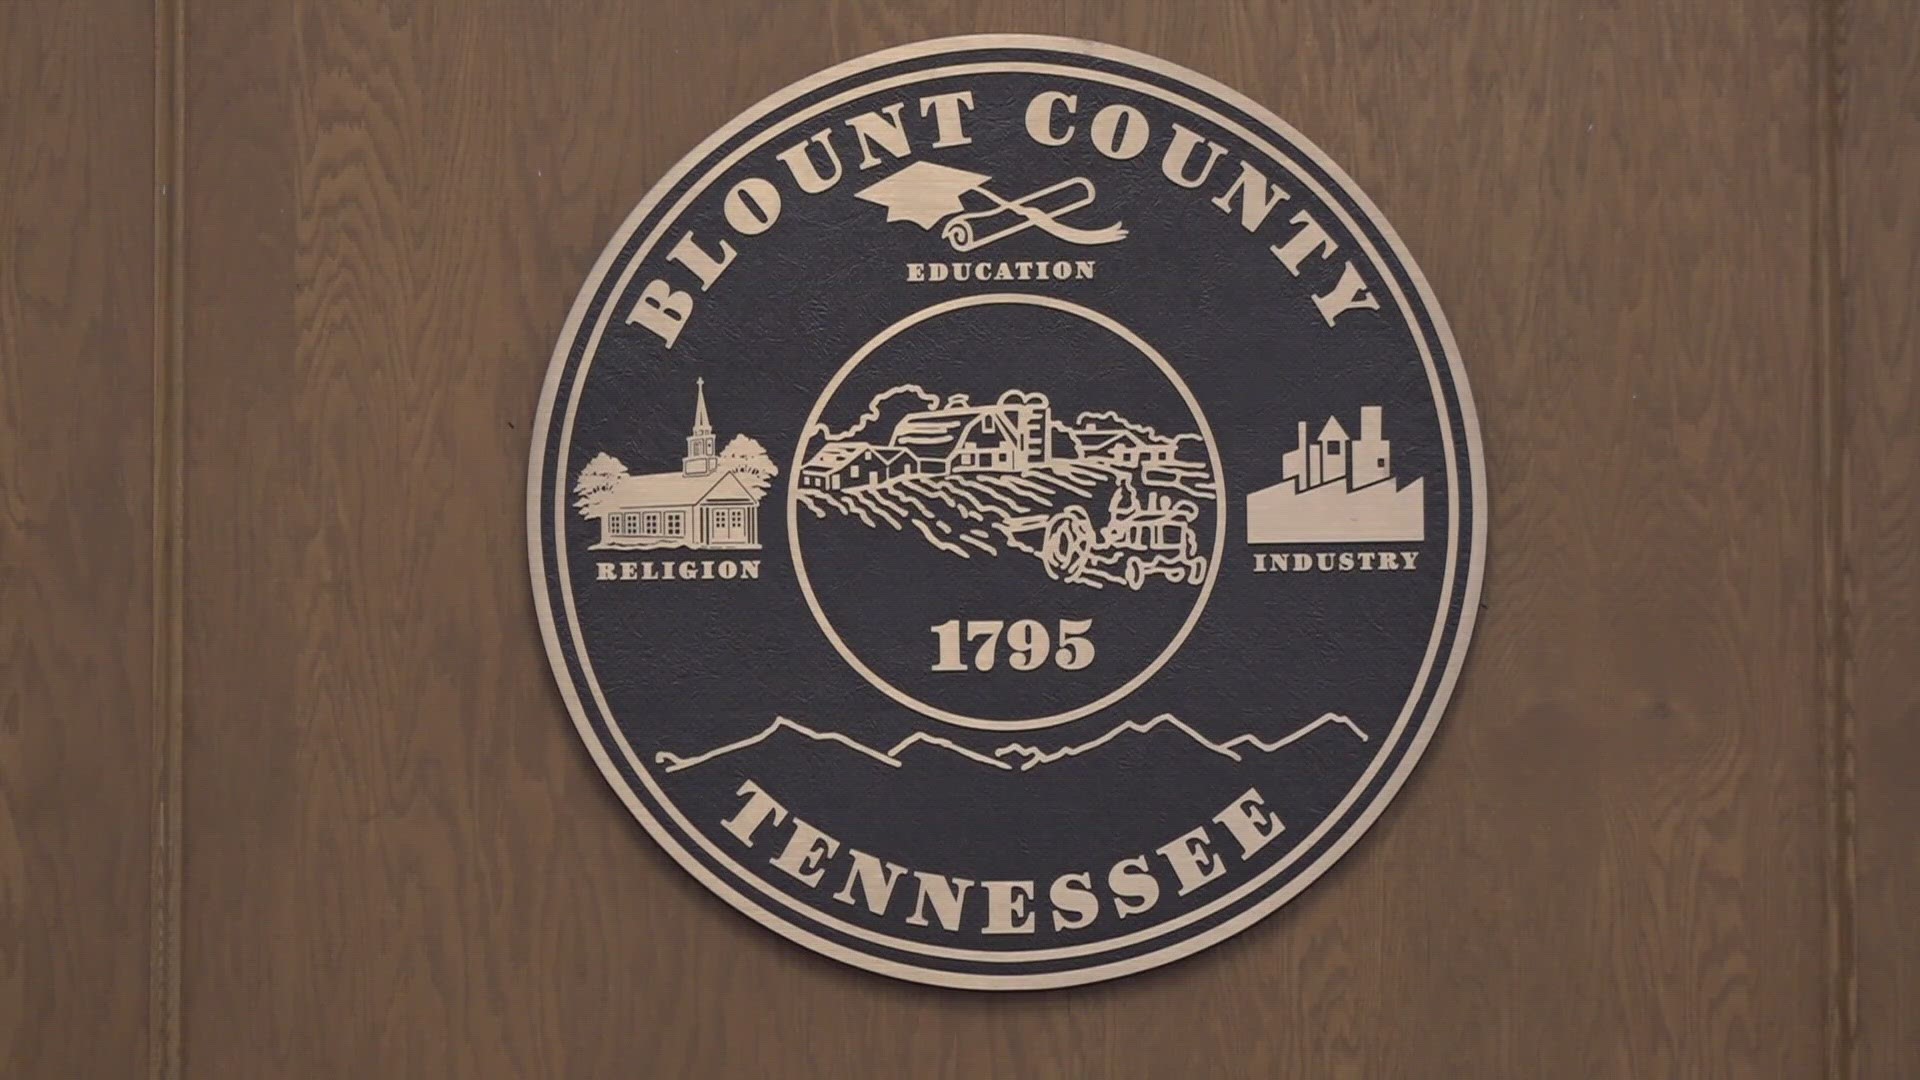 The Blount County Commission is expected to vote on the resolution on Thursday.